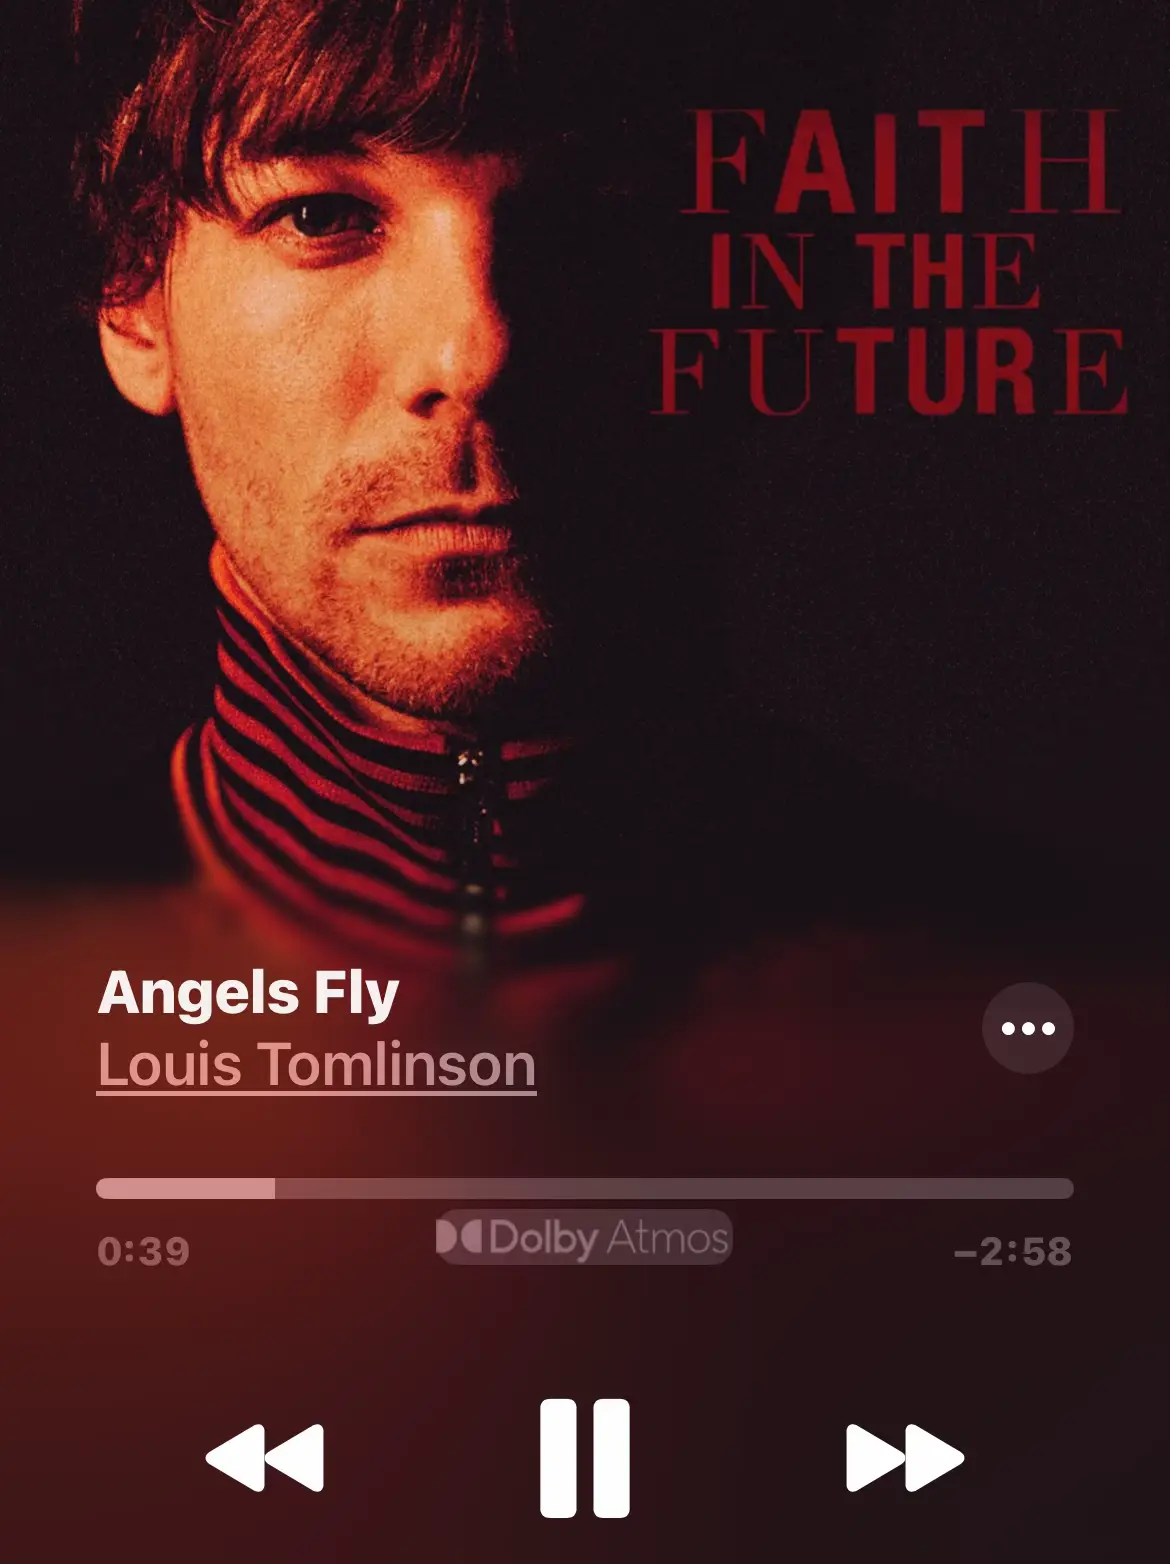 Emotional connection with Louis Tomlinson's music - Lemon8 Search